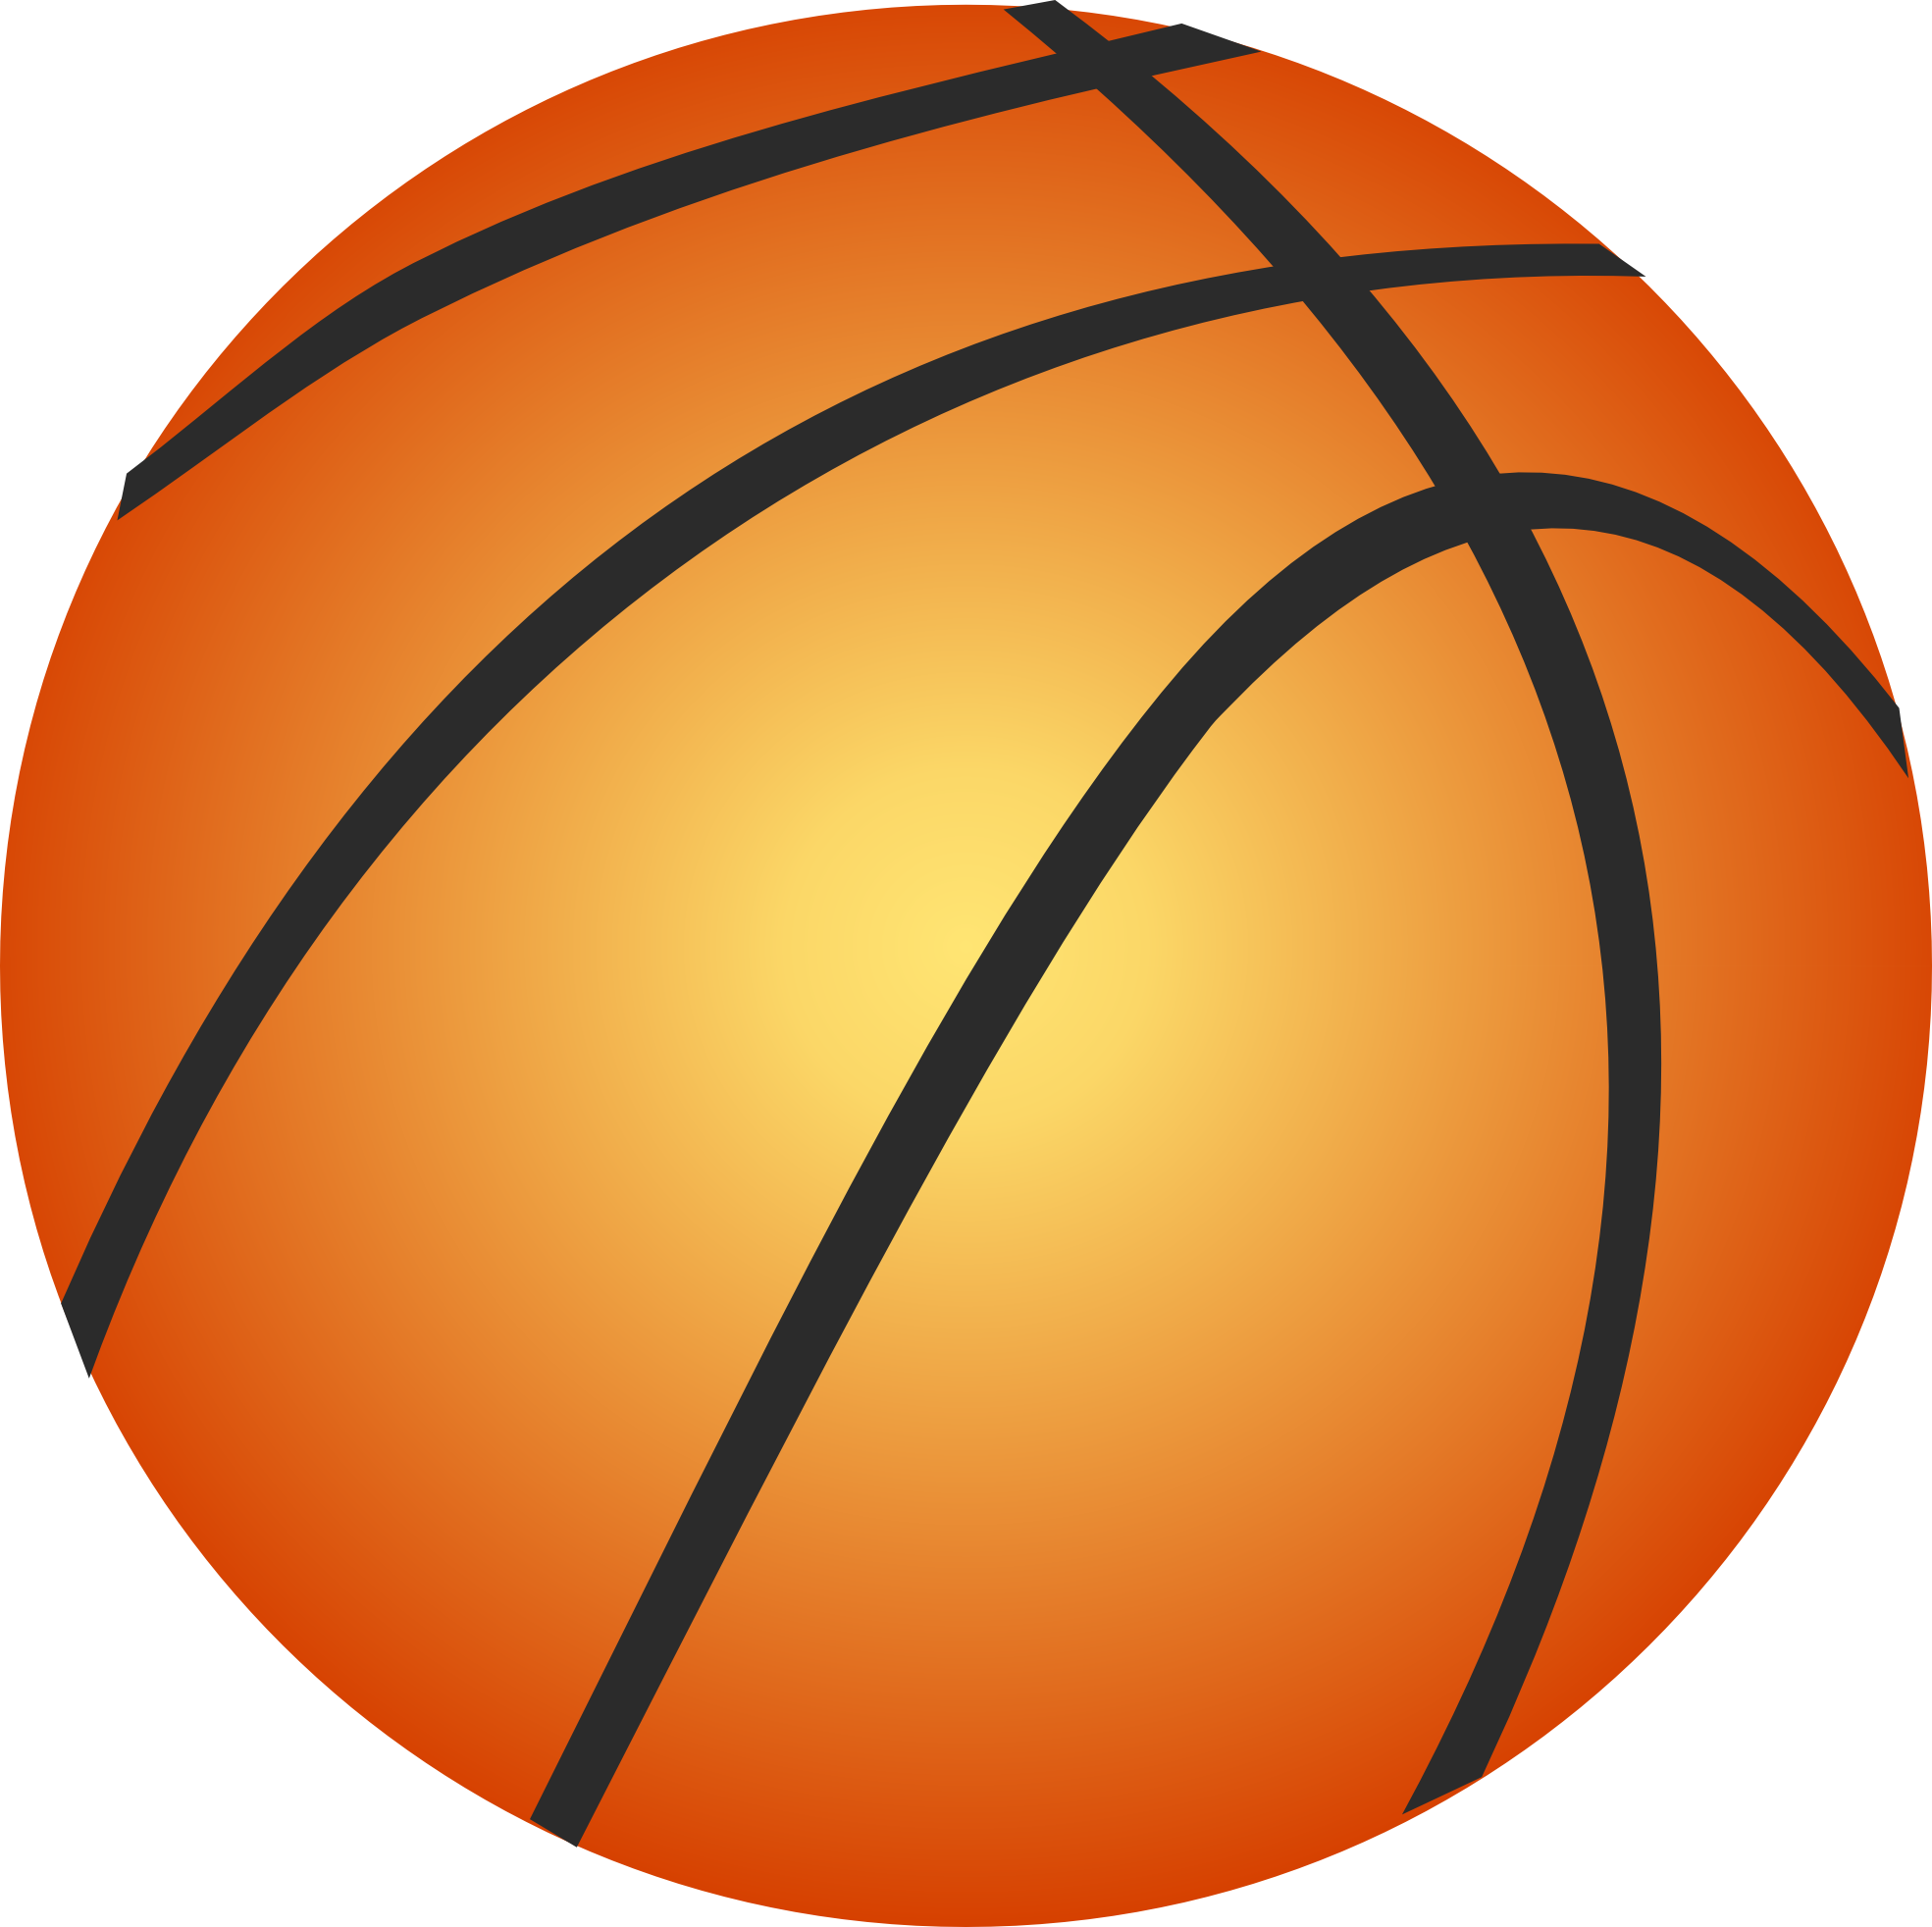 basketball court clipart blac - Basketball Pictures Clip Art